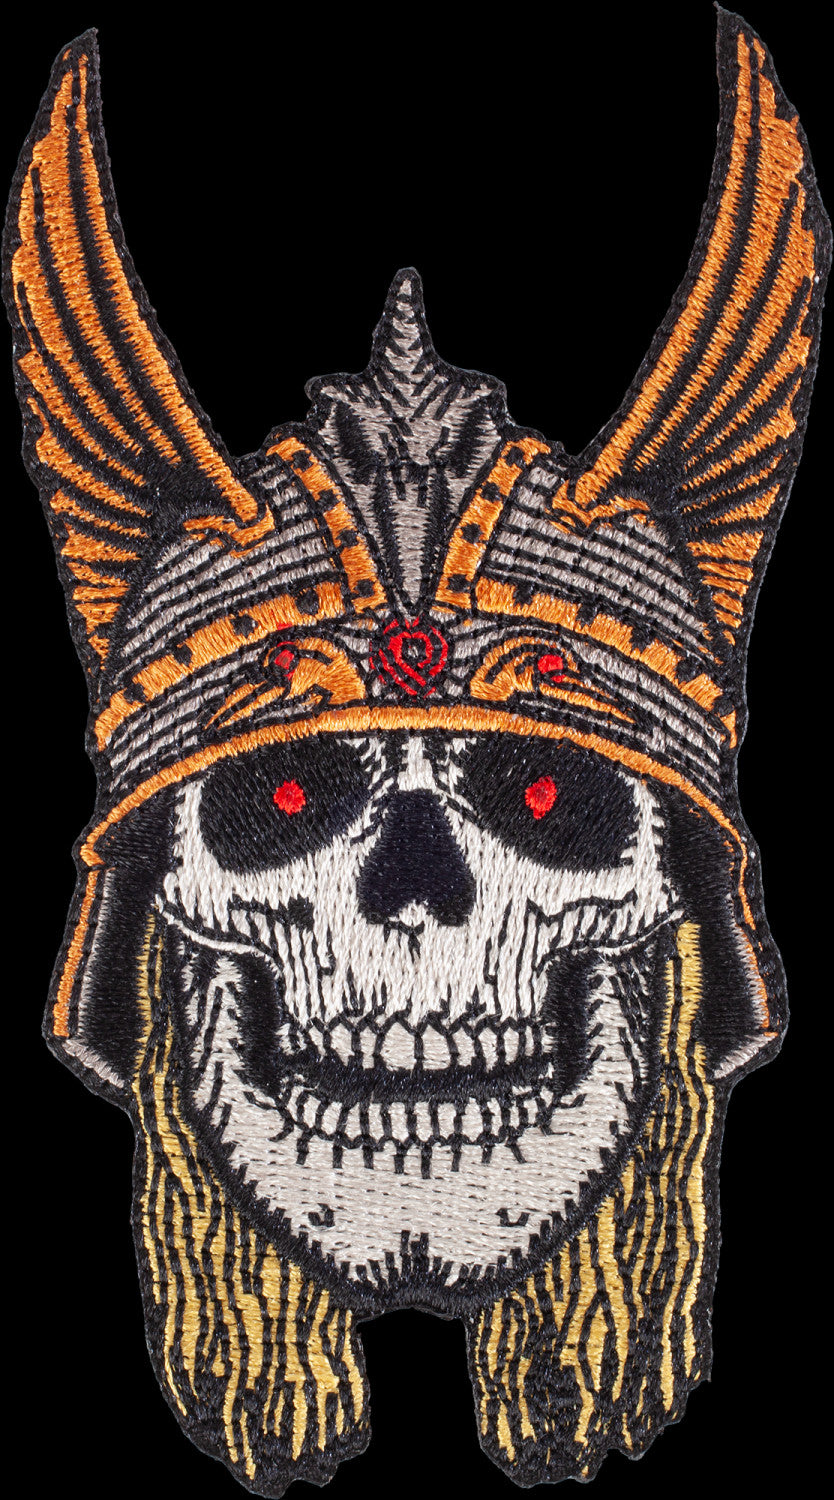 Powell Peralta Andy Anderson Skull Patch 4"